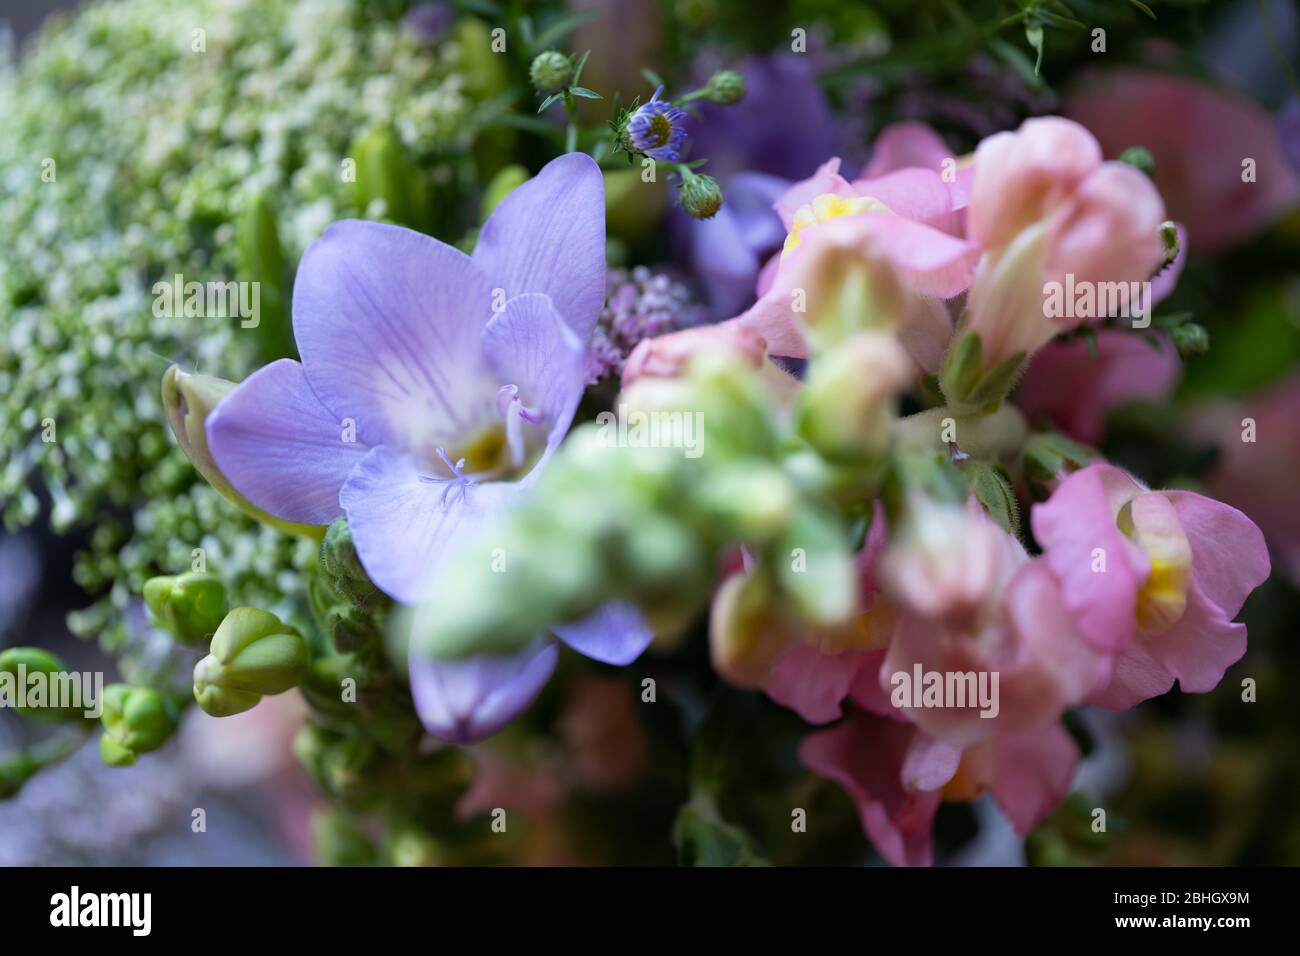 Close-up / macro photograph of freesia and snapdragon flowers in a UK garden with a shallow depth of field and blurred background / bokeh Stock Photo